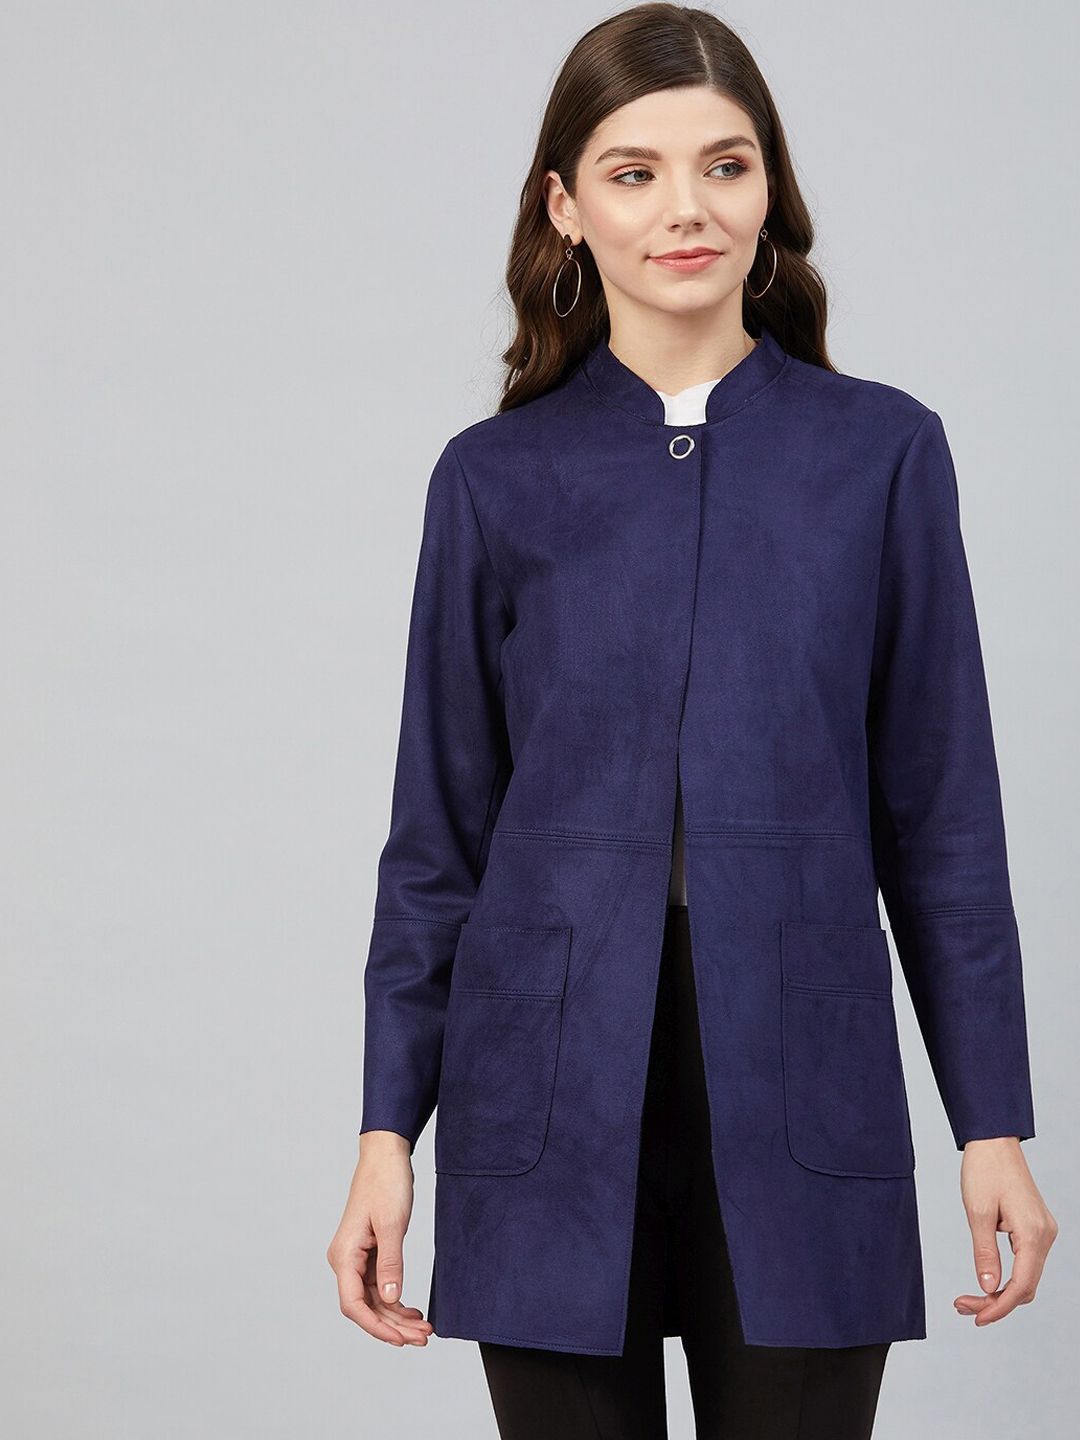 Carlton London Women Blue Solid Tailored Jacket Price in India